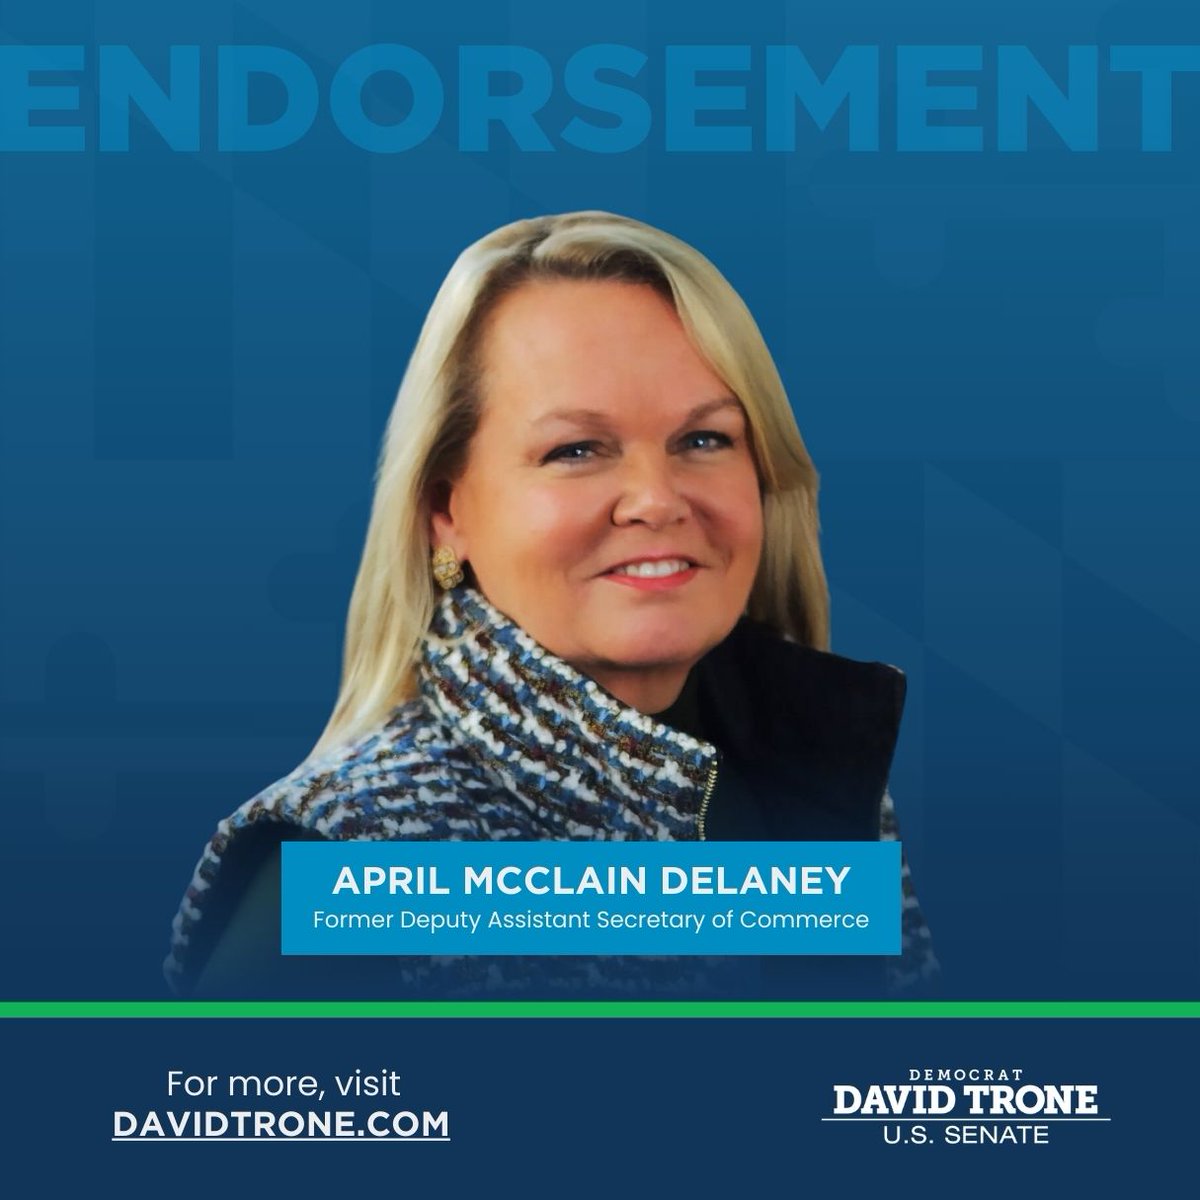 Excited to have the endorsement of former Deputy Assistant Secretary of Commerce @April4Congress. With 15+ years of championing online safety and youth mental health, she boasts a robust history of community service and bringing common sense to politics.